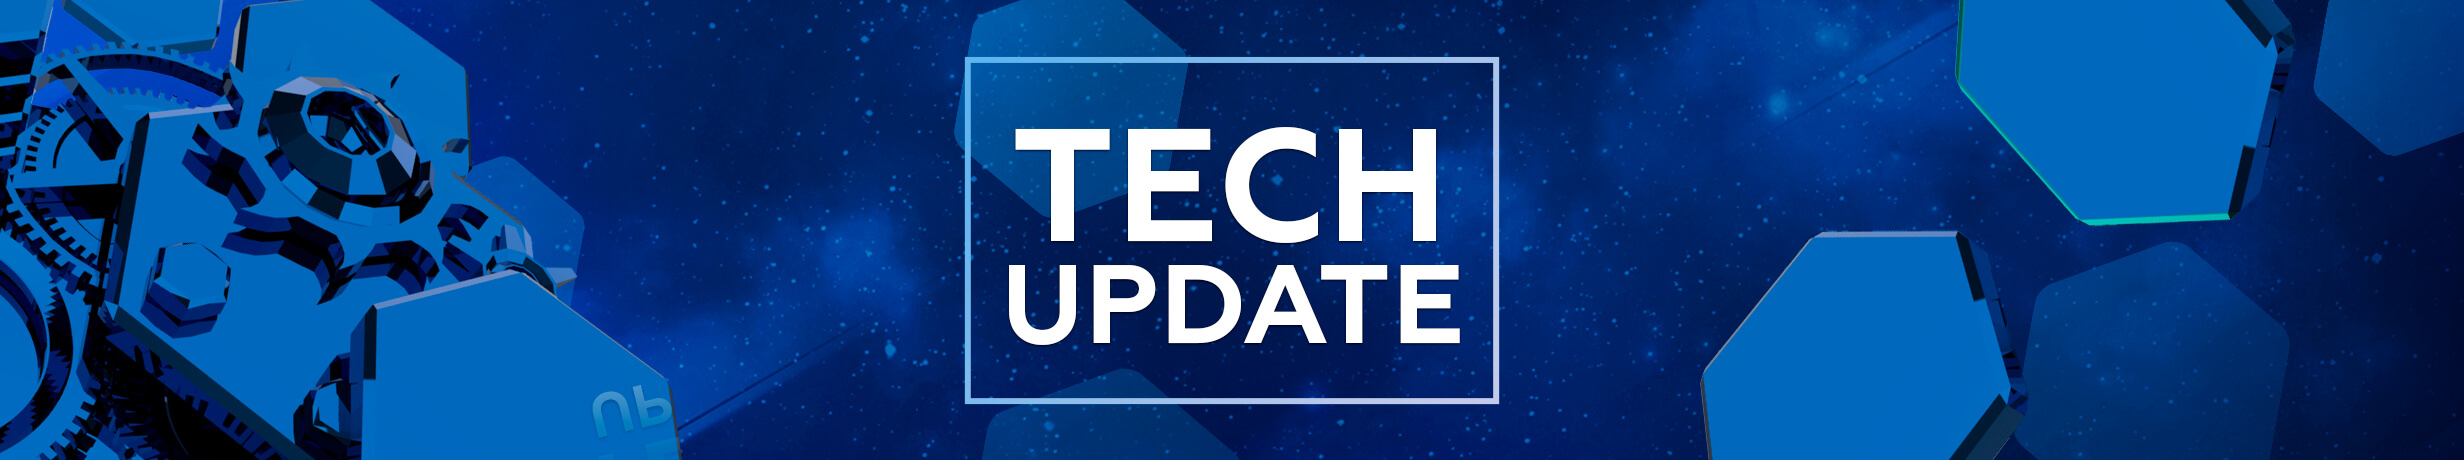 Tech Update on DMarket: The Full List of Features